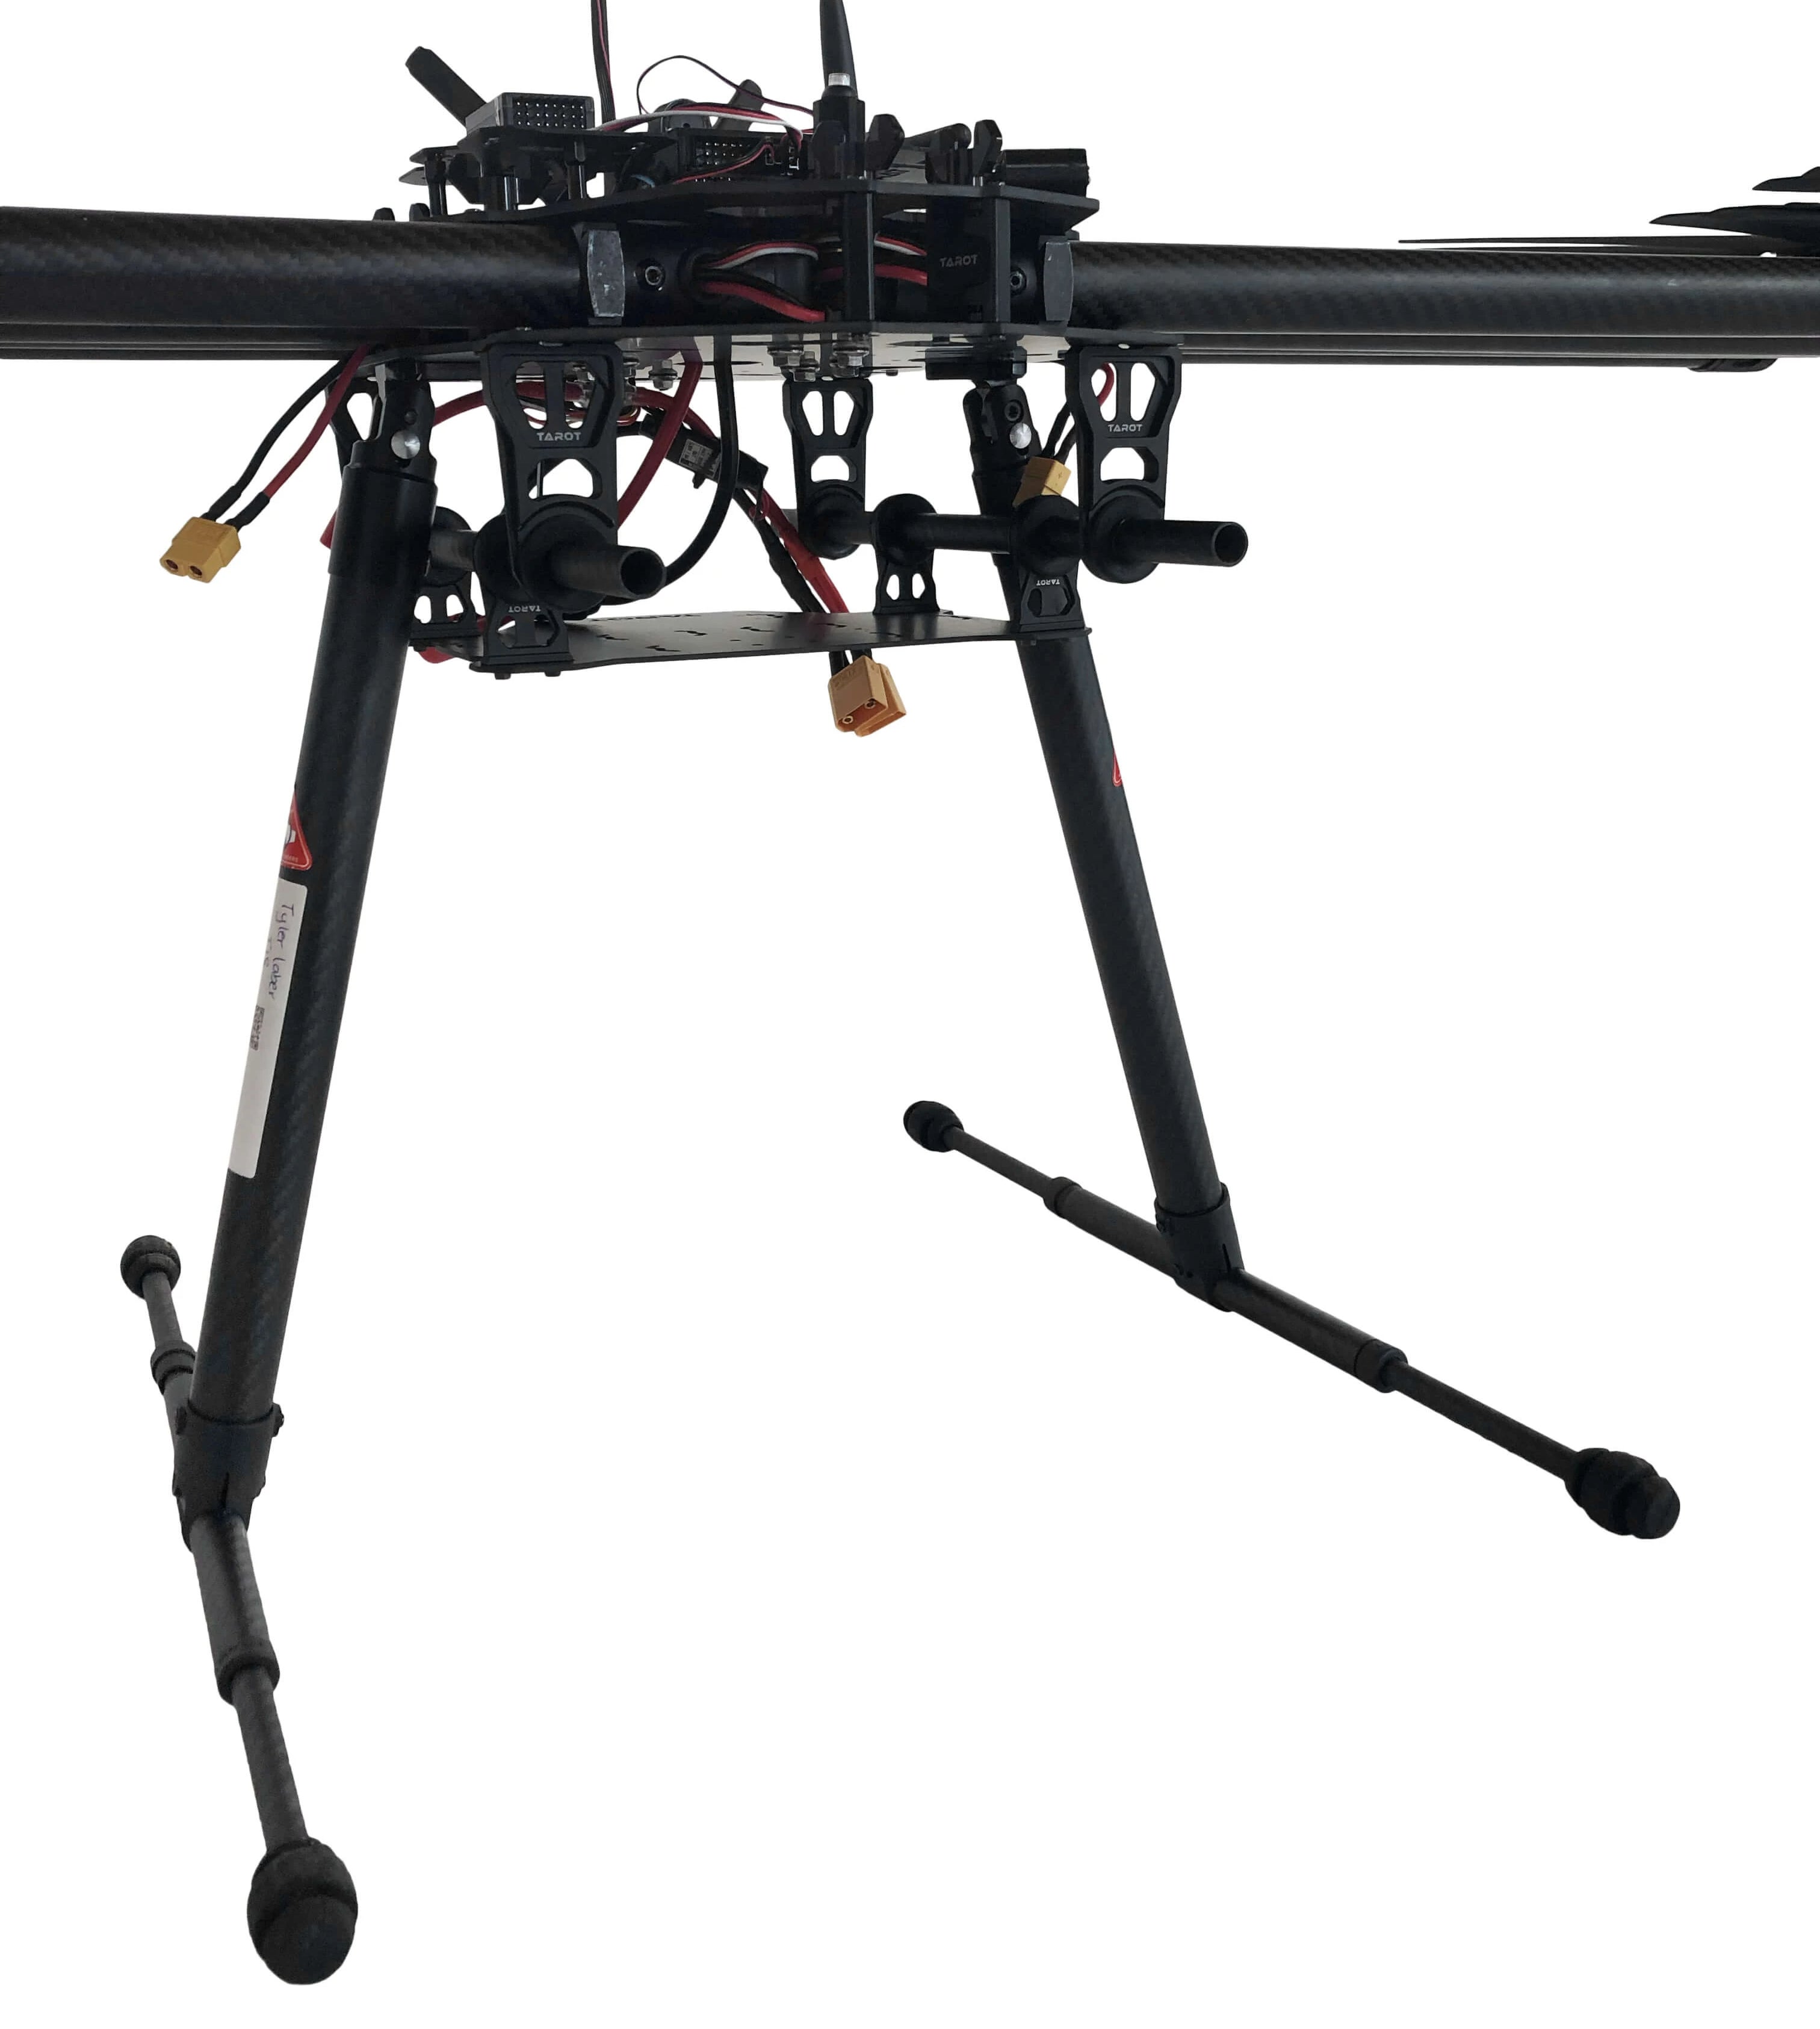 Tarot T-18 Heavy Lift Payload Drone Payload Mount View